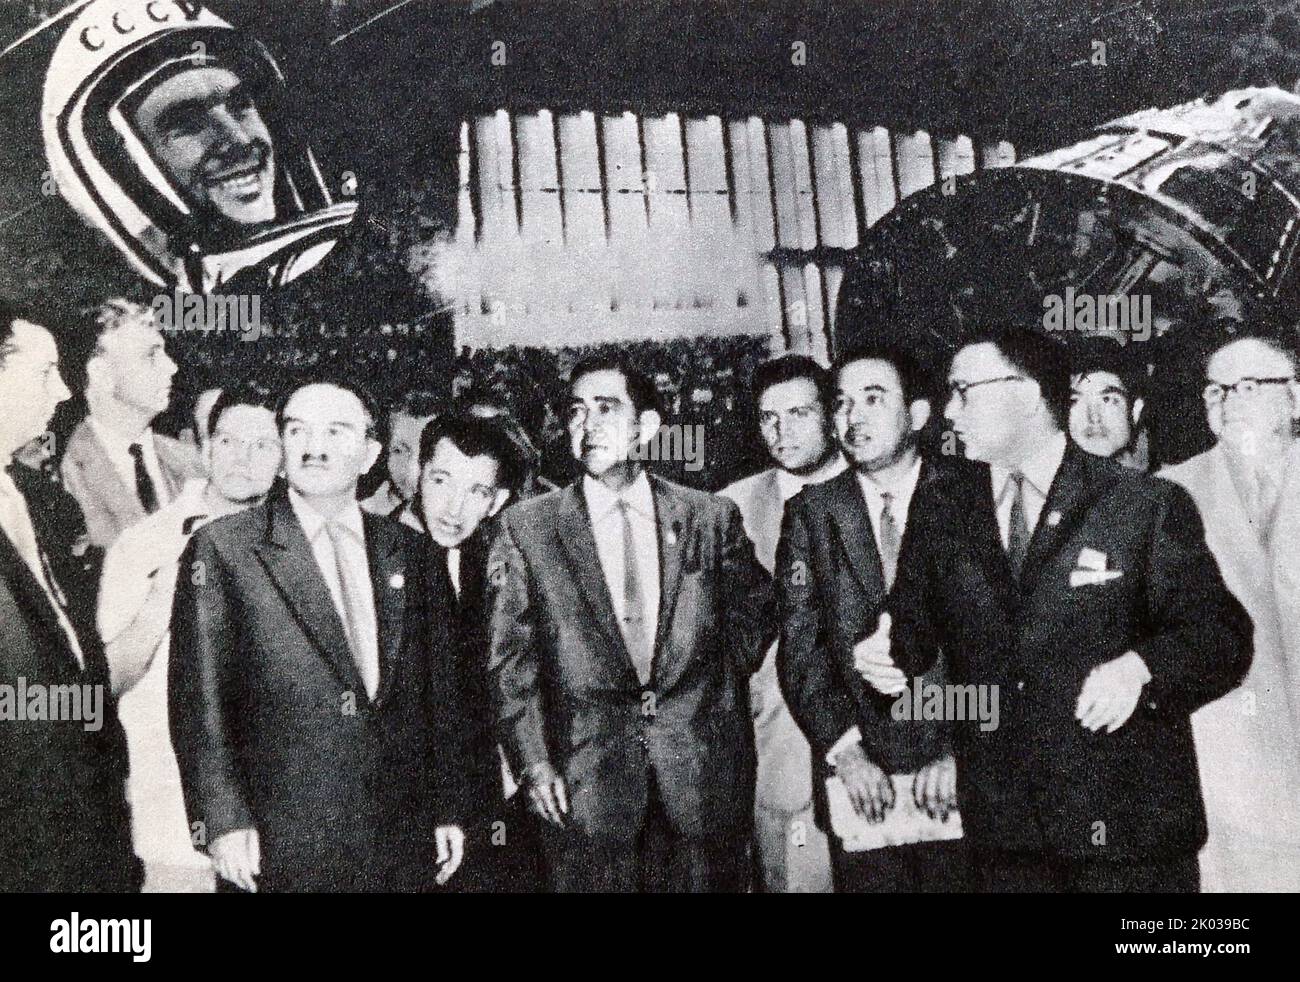 The Japanese people enthusiastically greeted the First Deputy Chairman of the Council of Ministers of the USSR A. I. Mikoyan, who visited Japan on the occasion of the opening of the Soviet trade and industrial exhibition. A. I. Mikoyan met with the country's leaders and representatives of its business and public circles. Both sides expressed the hope that trade relations between the two states will develop better. There is a real opportunity to bring trade turnover to $ 1 billion in the coming years. The picture shows a tour of one of the halls of the Soviet exhibition in Tokyo. Stock Photo